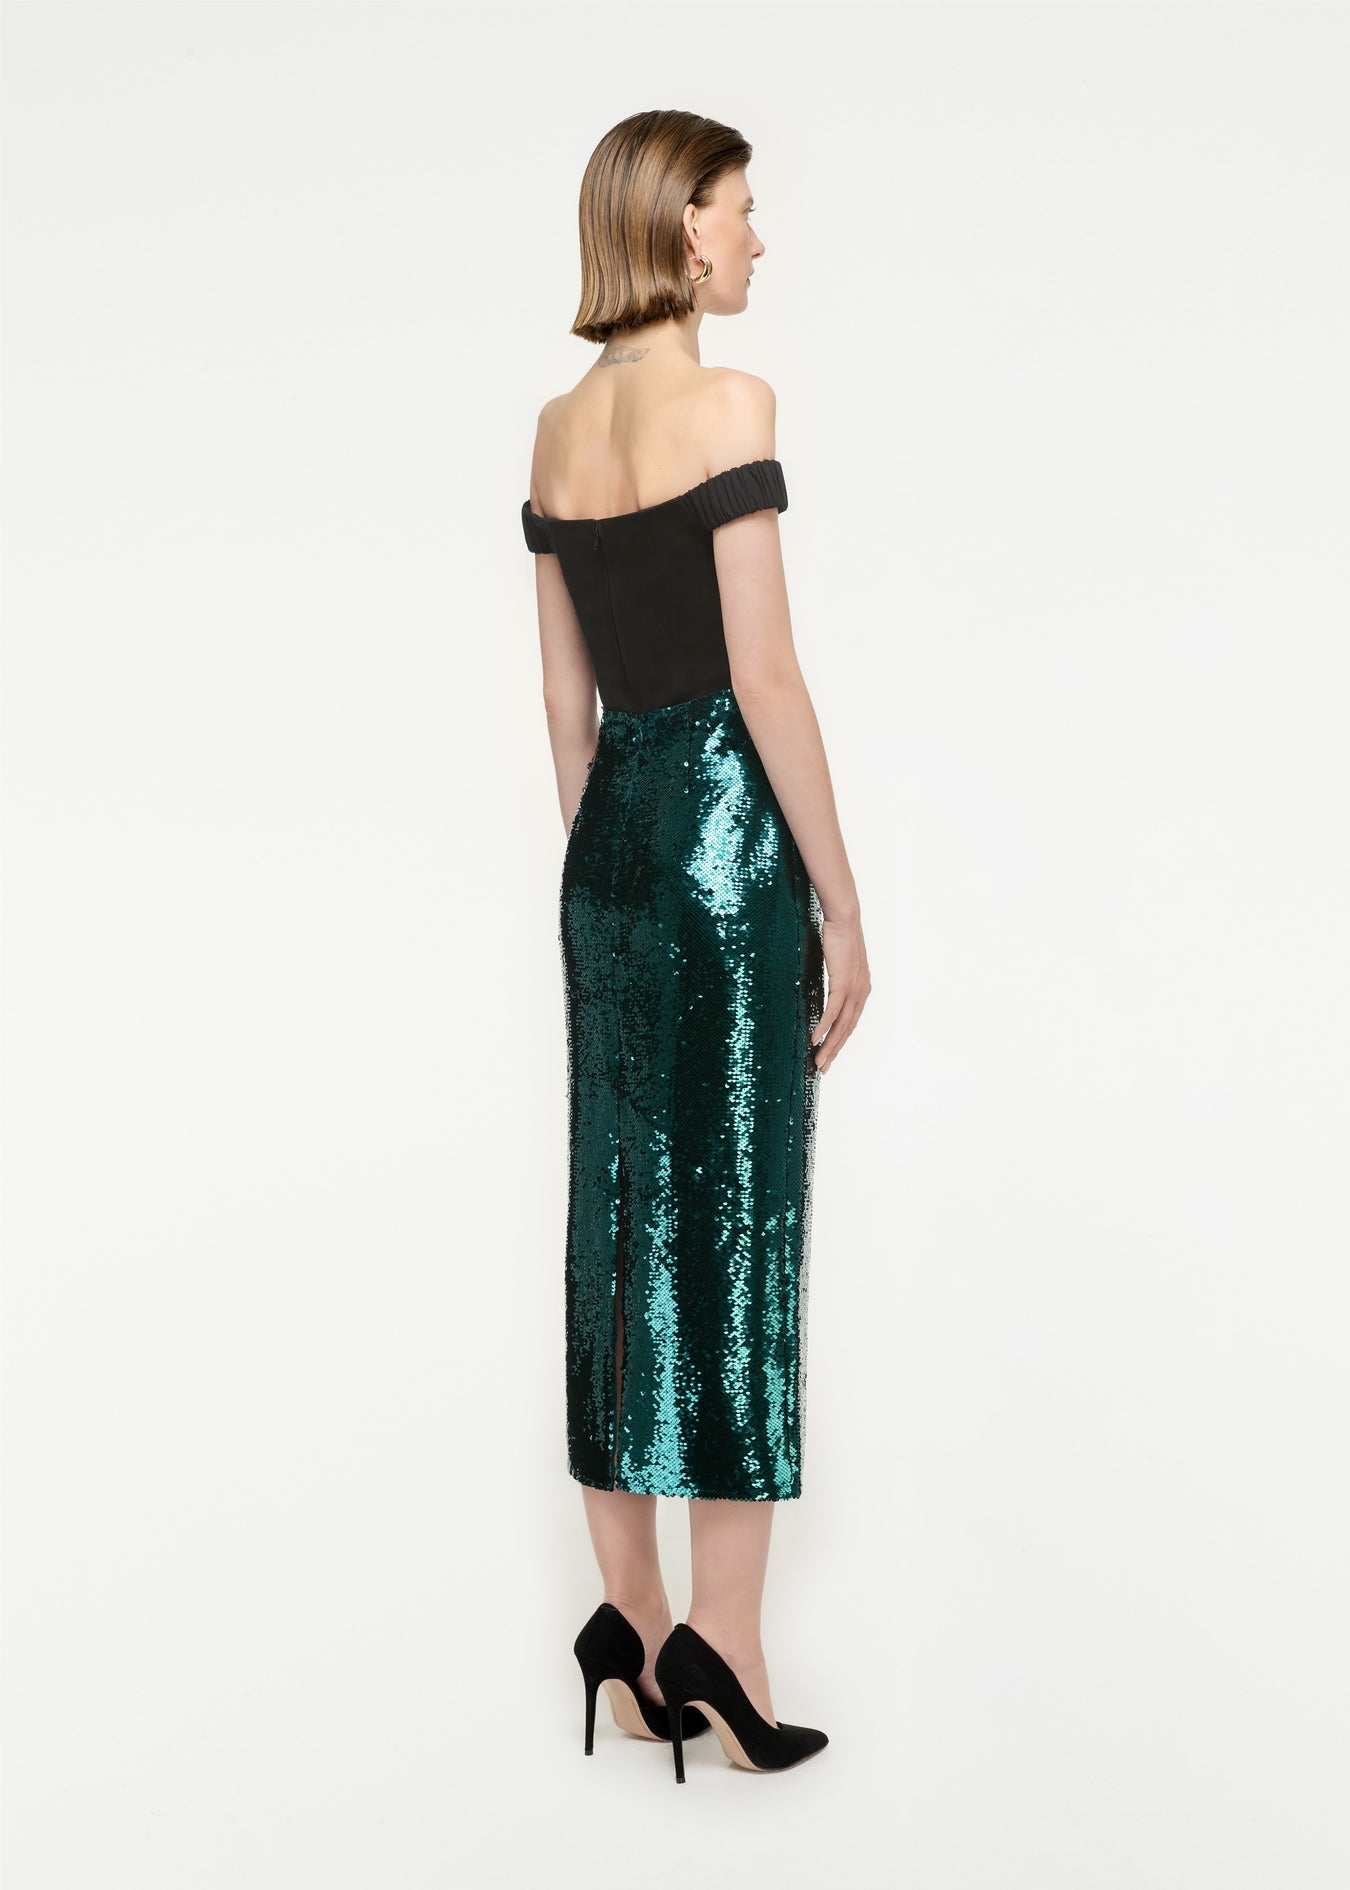 The back of a woman wearing the Sequin Midi Skirt in Green